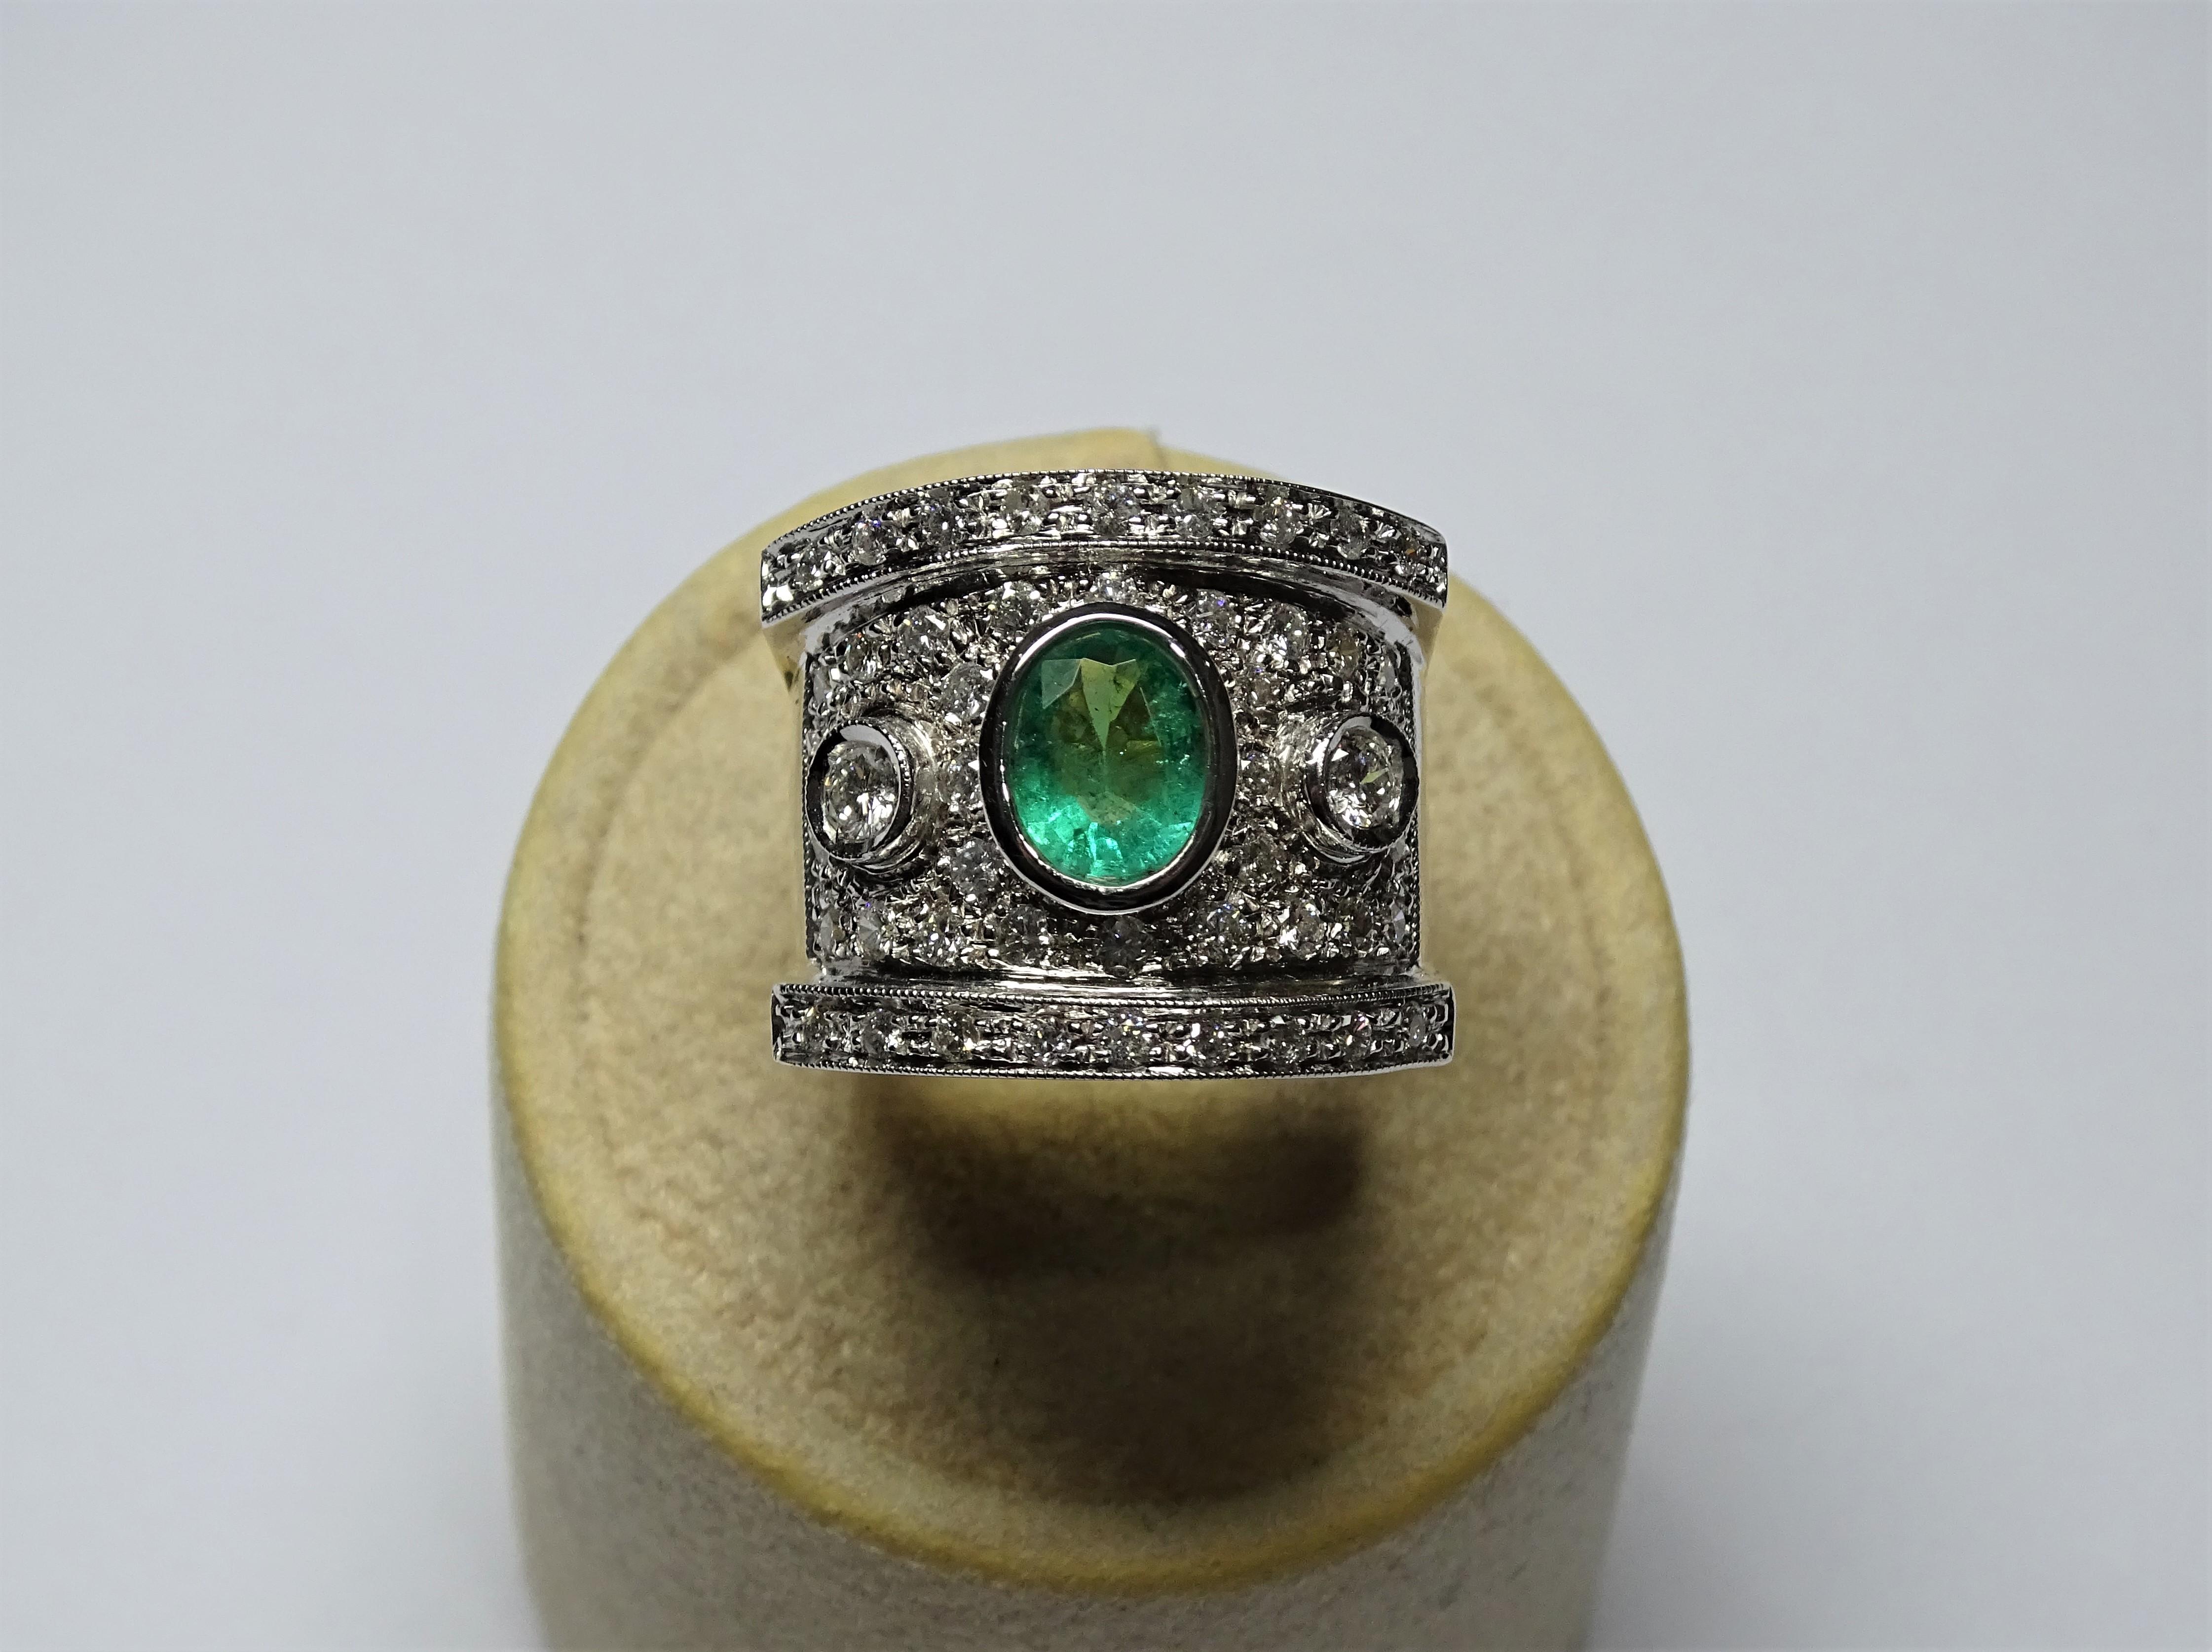 This Ring is made of 18K Yellow Gold and White Gold.
This Ring has 1.08 Carats of White Diamonds.
This Ring has 1.01 Carats of Natural Oval Cut Emerald.
This Ring is inspired by Art Deco.
Size ITA: 18 USA: 8.5
We're a workshop so every piece is